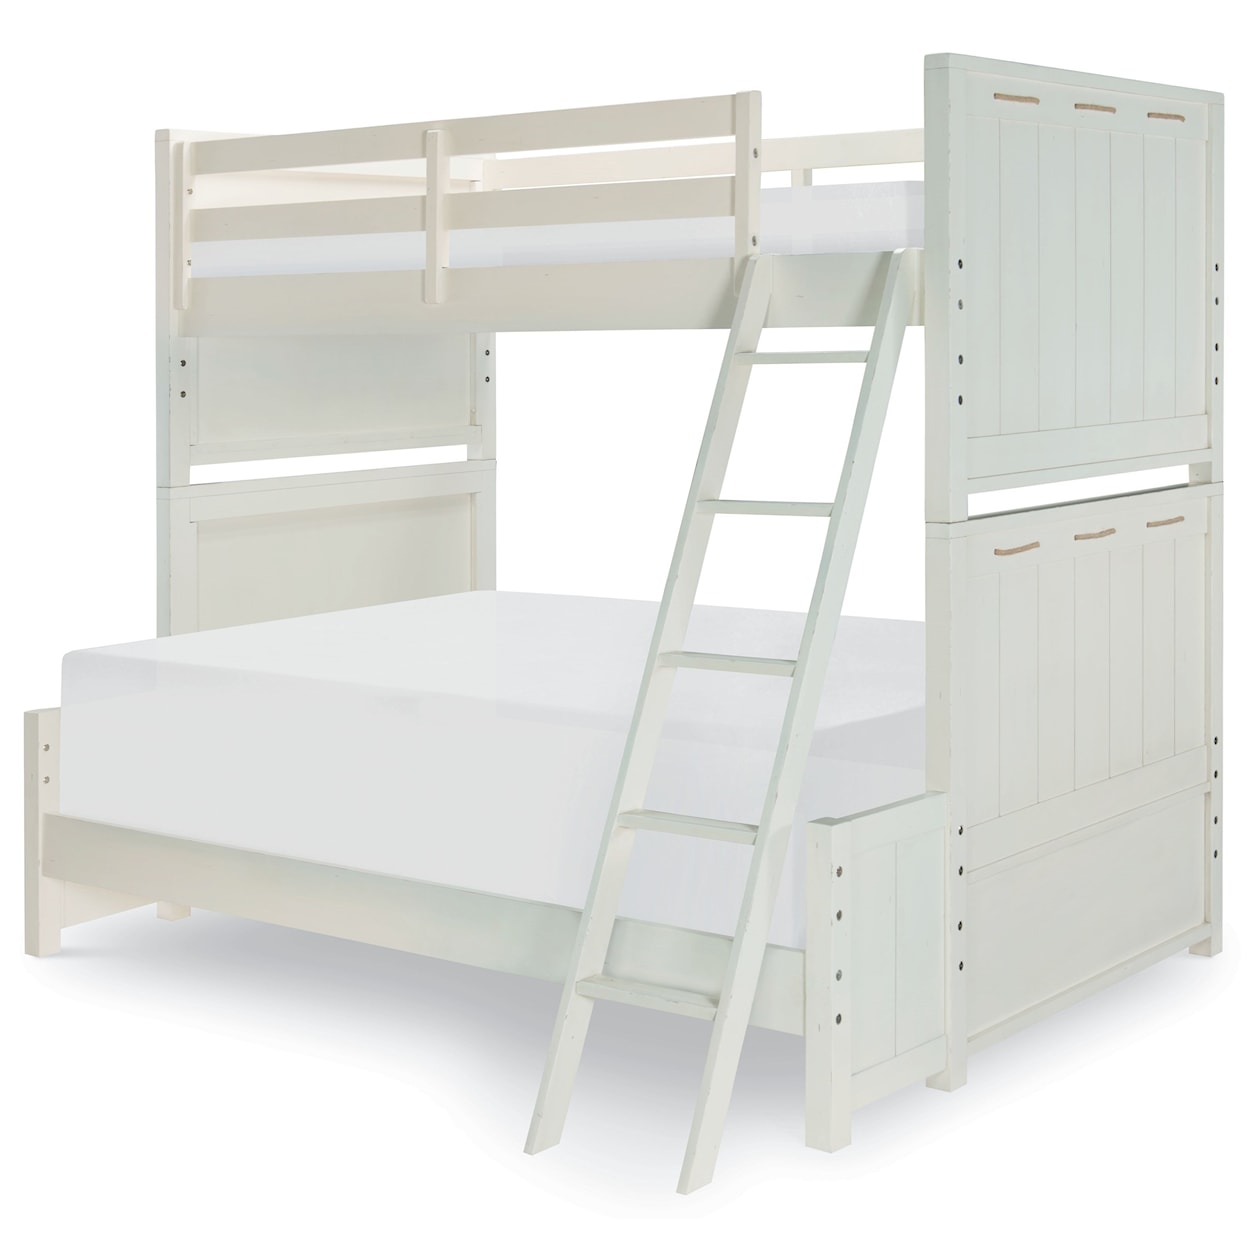 Legacy Classic Kids Lake House Twin over Full Bunk Bed